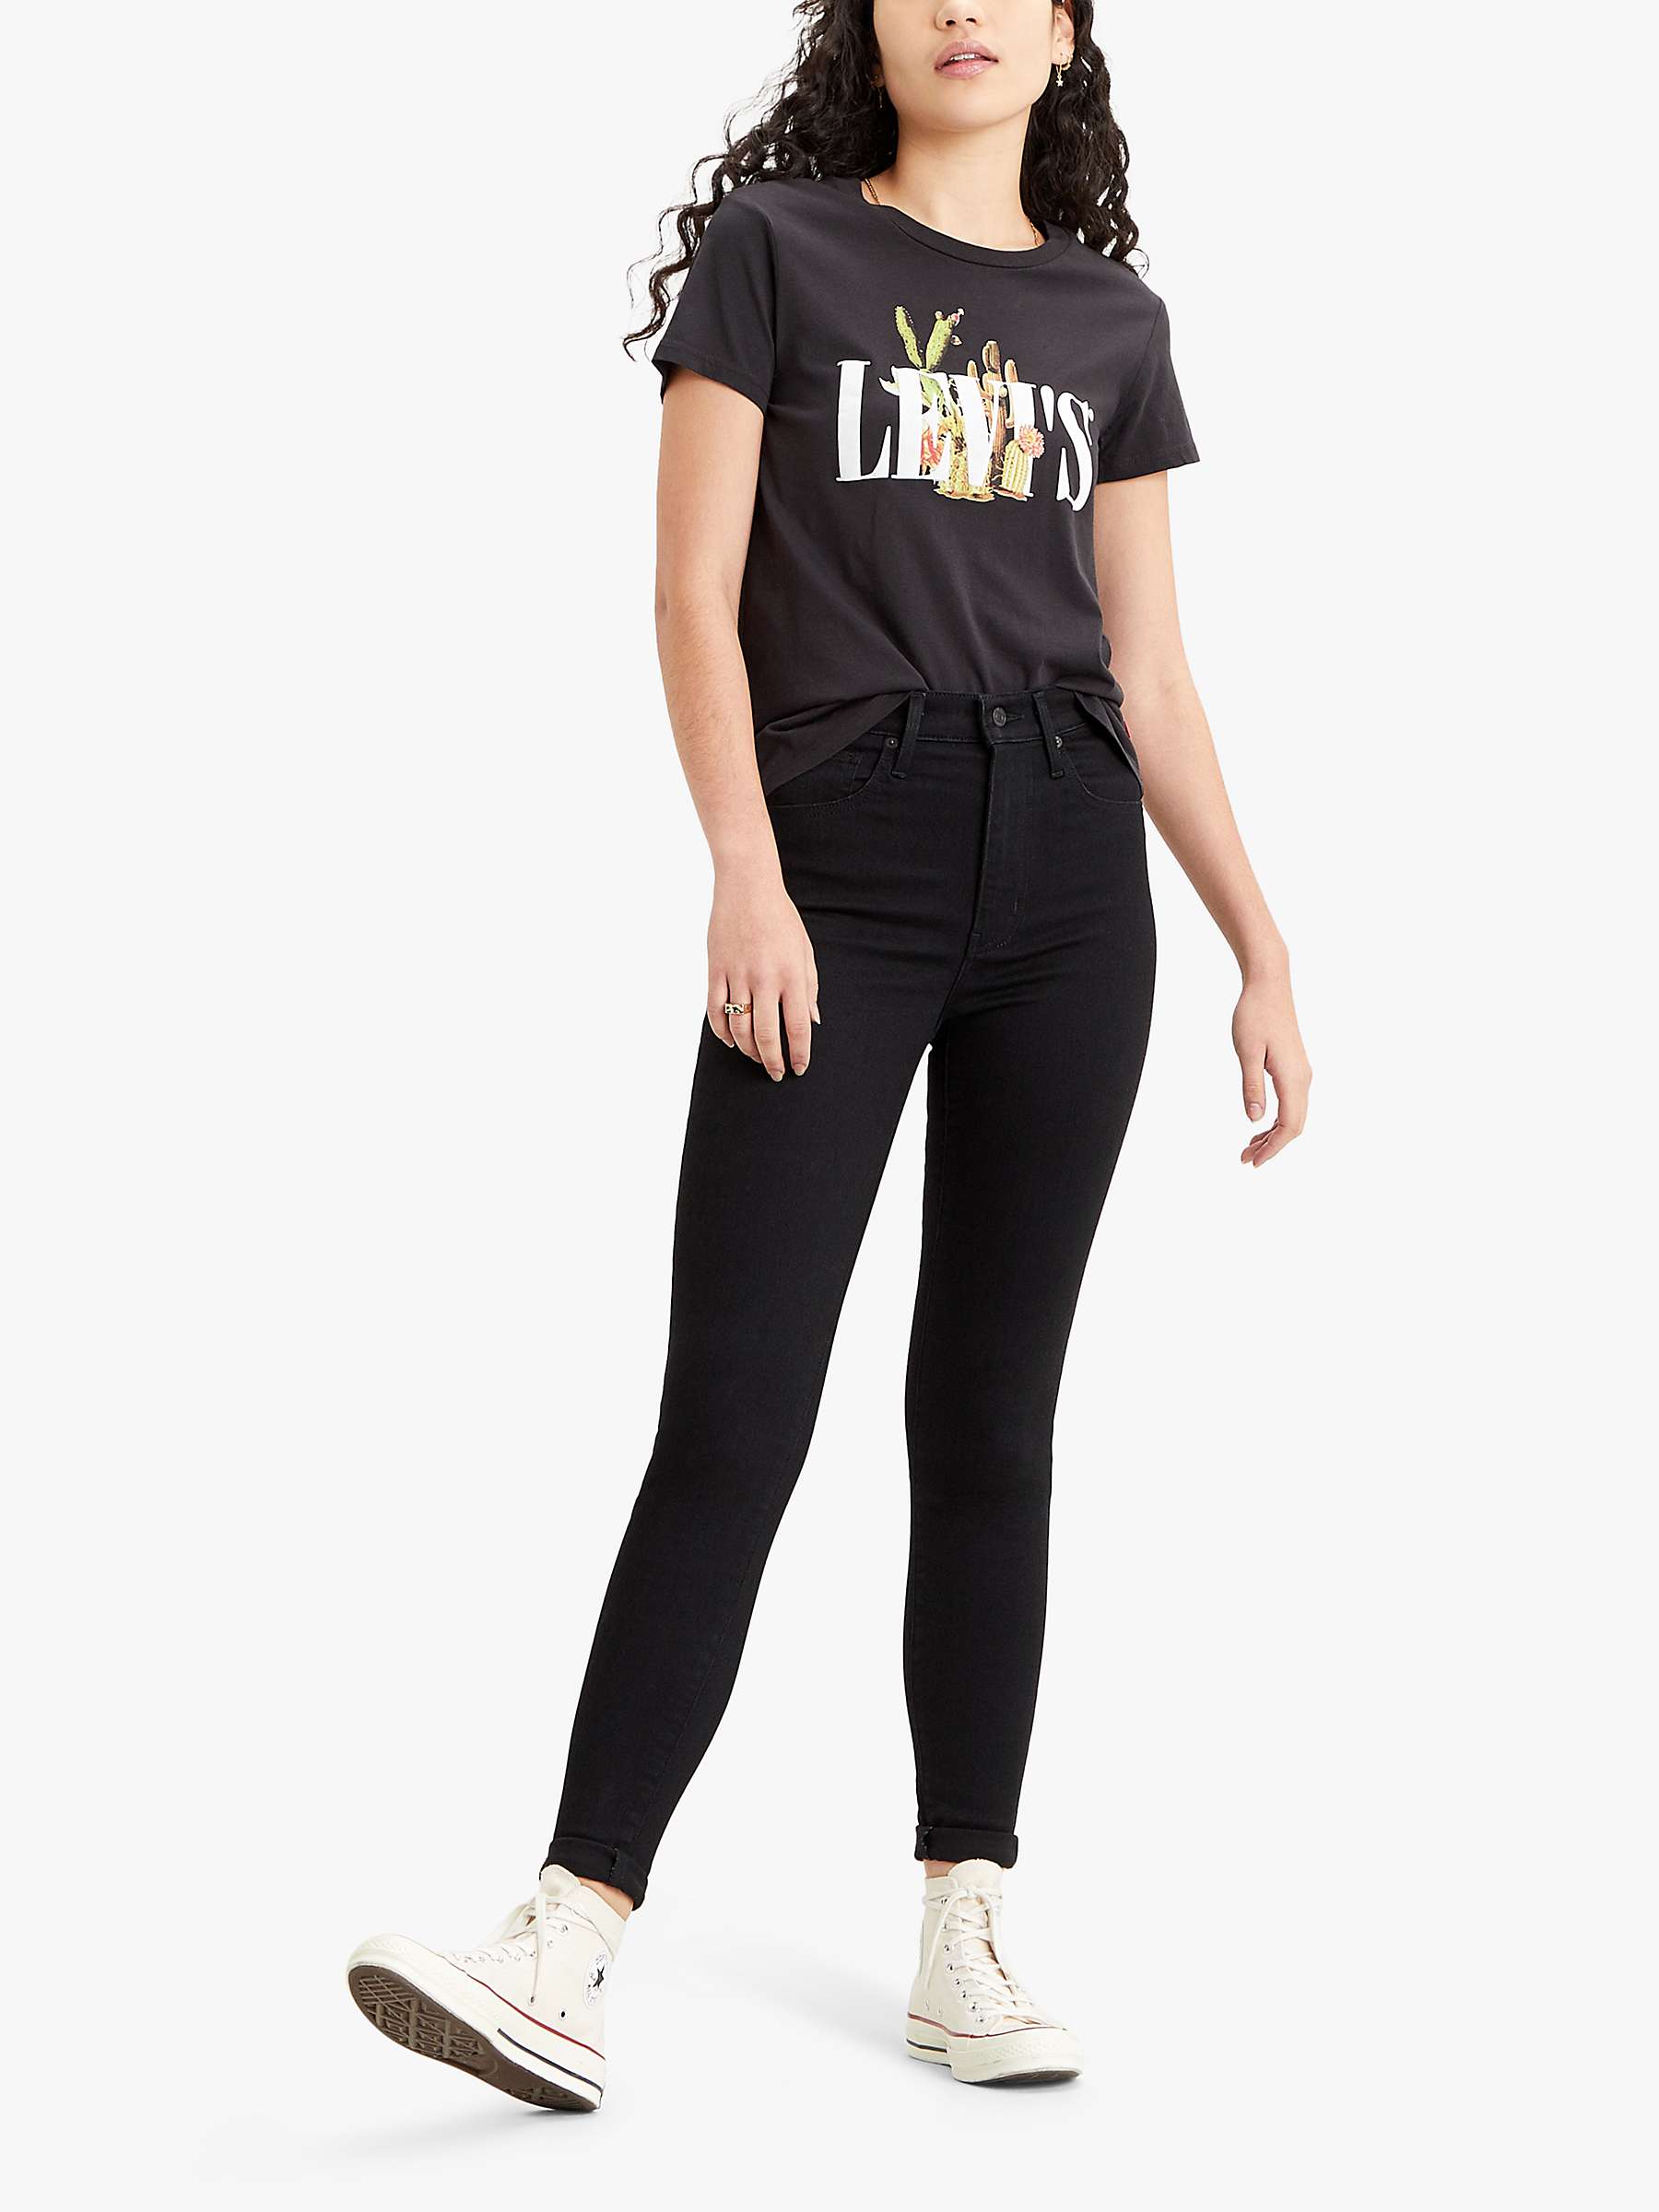 Buy Levi's Mile High Extra High Rise Super Skinny Jeans Online at johnlewis.com